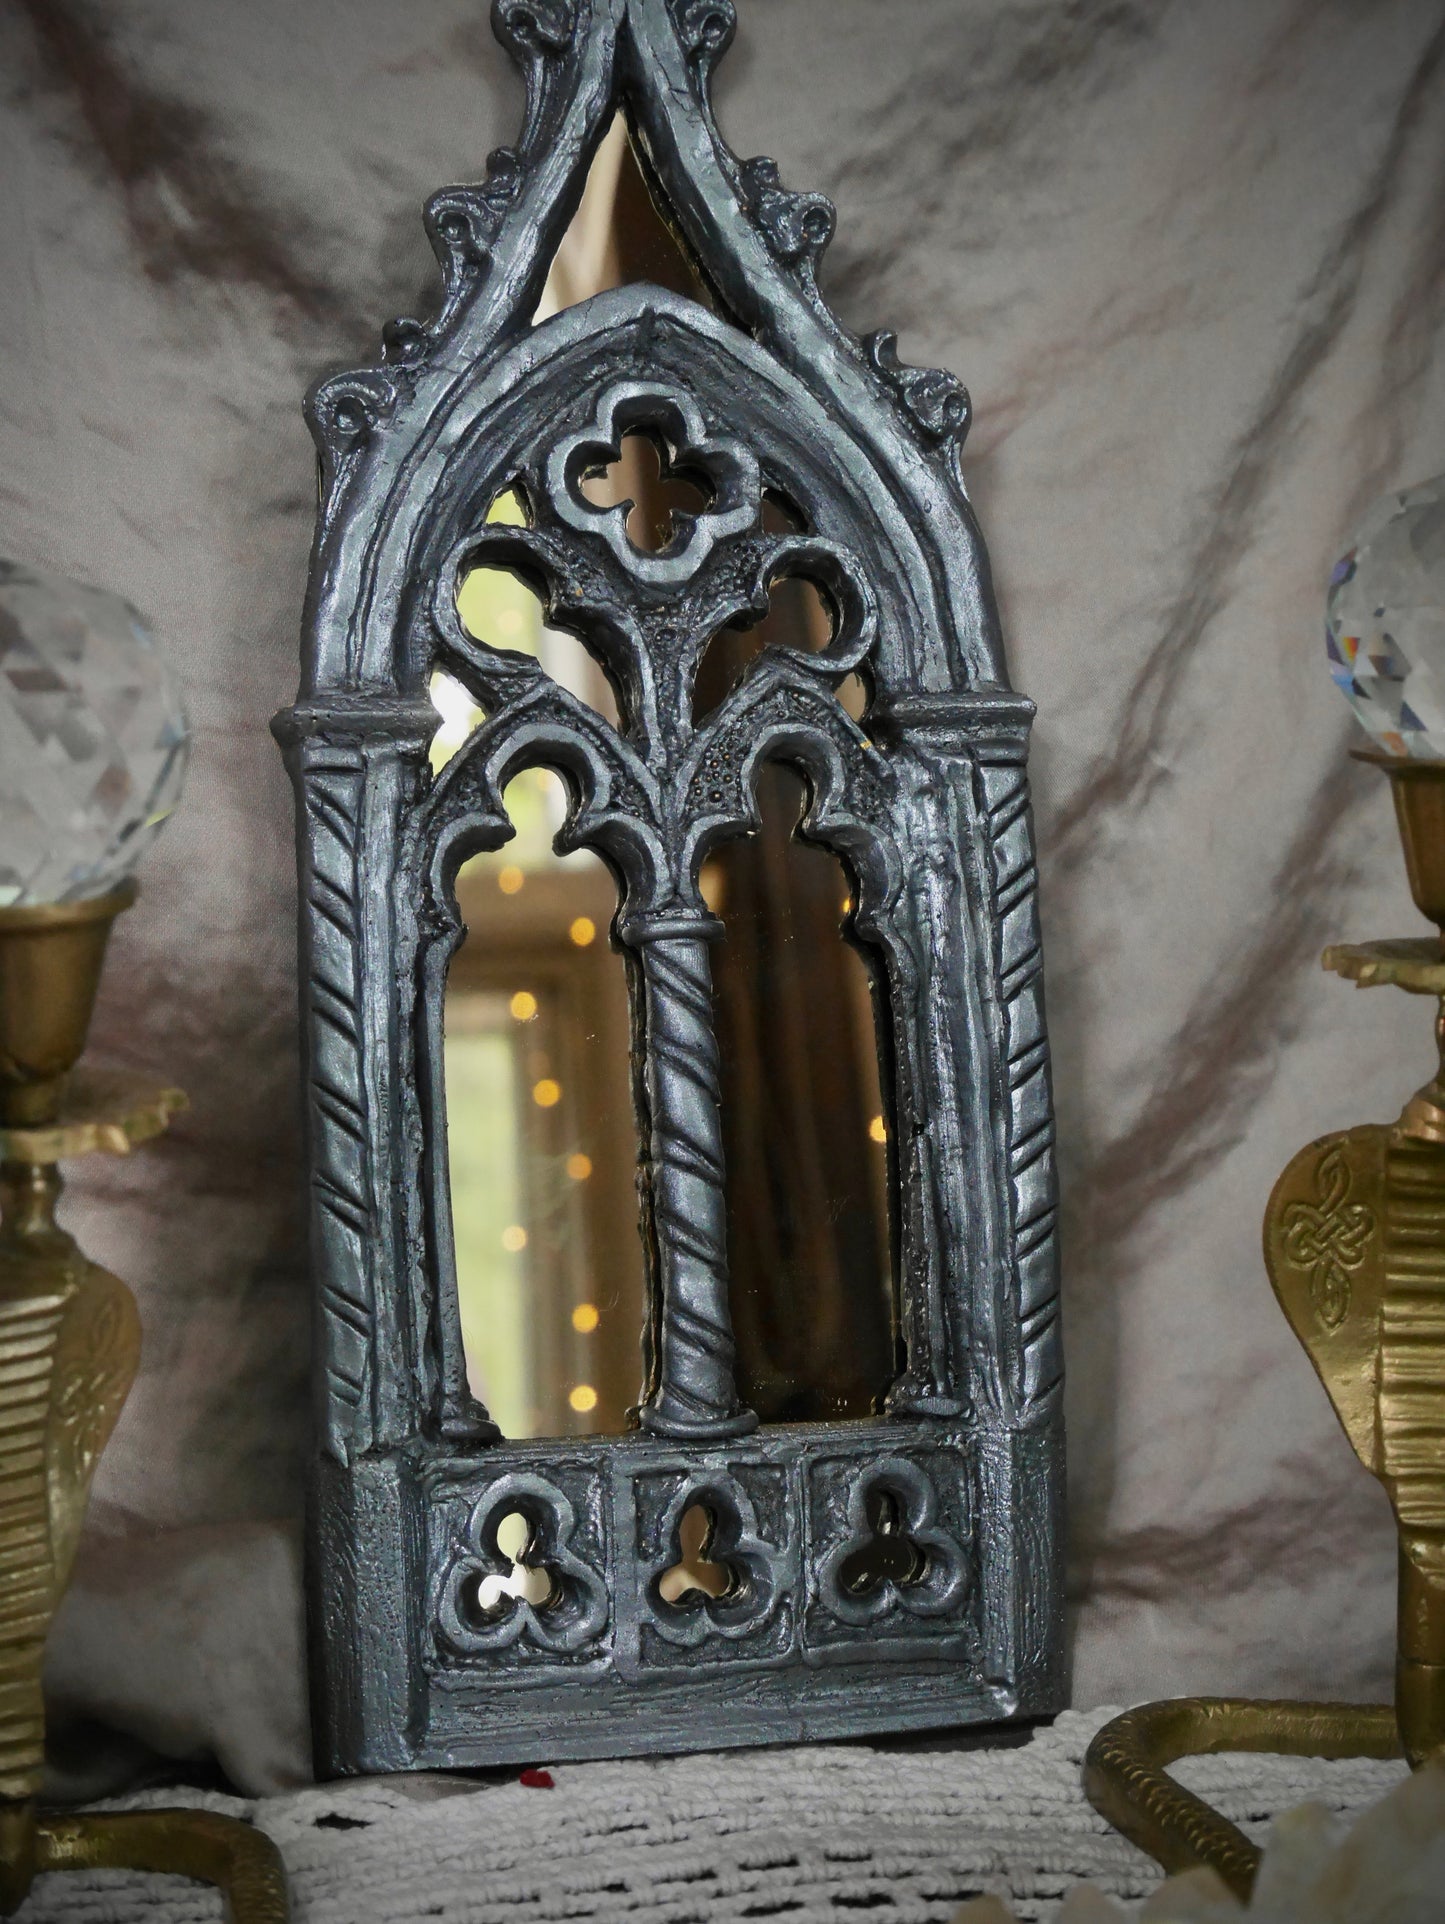 *New Improved Design* Gothic Spires - Black and Red Acrylic Mirror